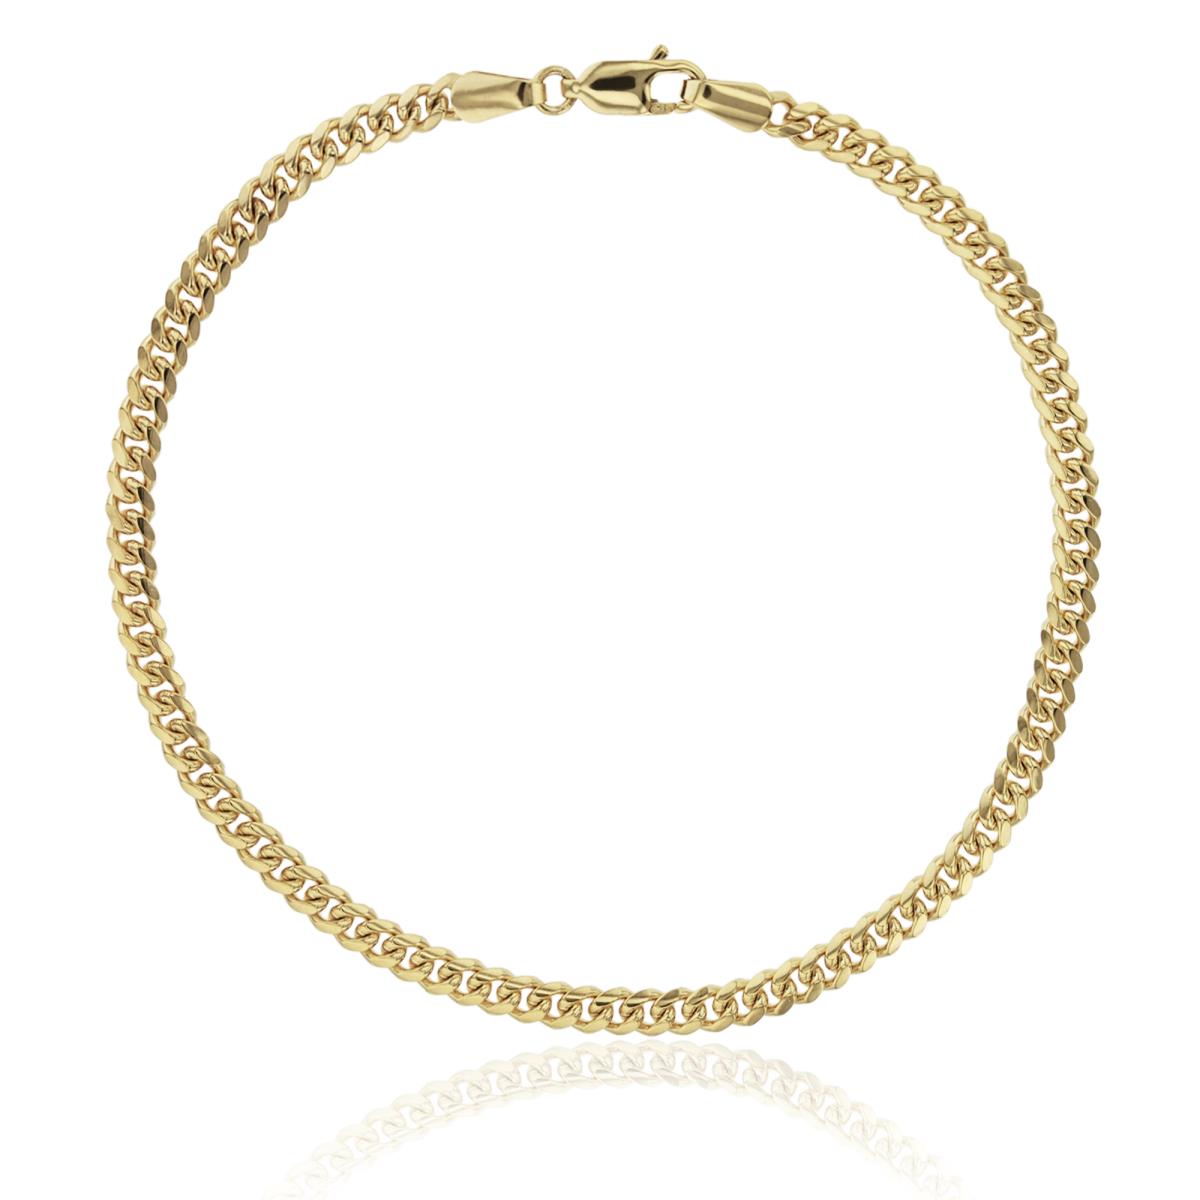 14K Yellow Gold 3.50mm 8.25" Solid Miami Cuban 100 Chain Bracelet with Lobster Lock